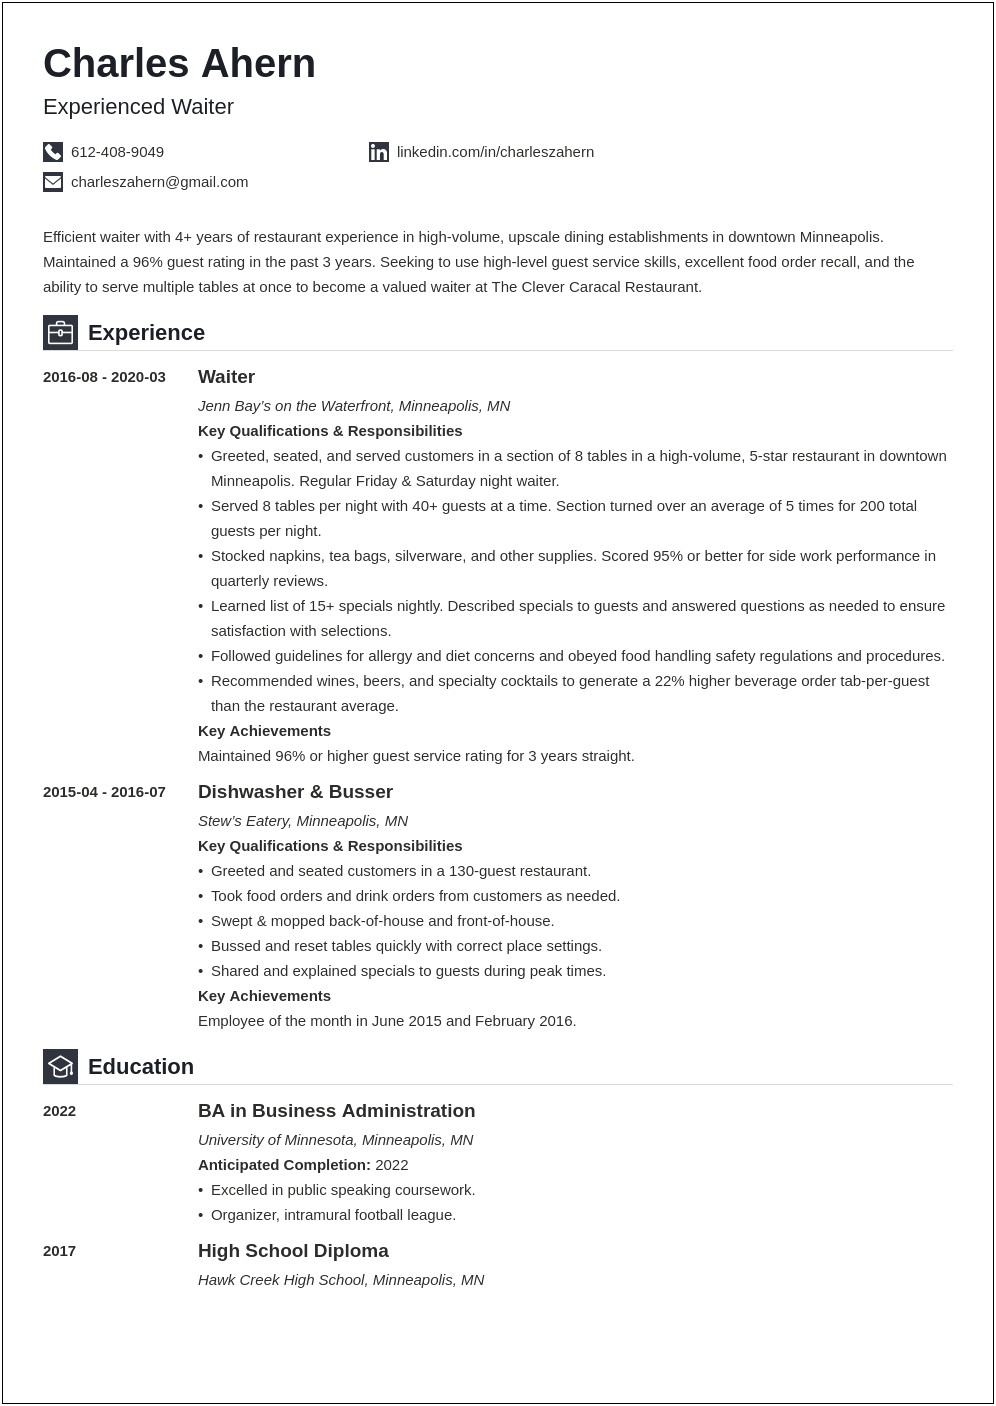 Examples Of Work Skills For Resume